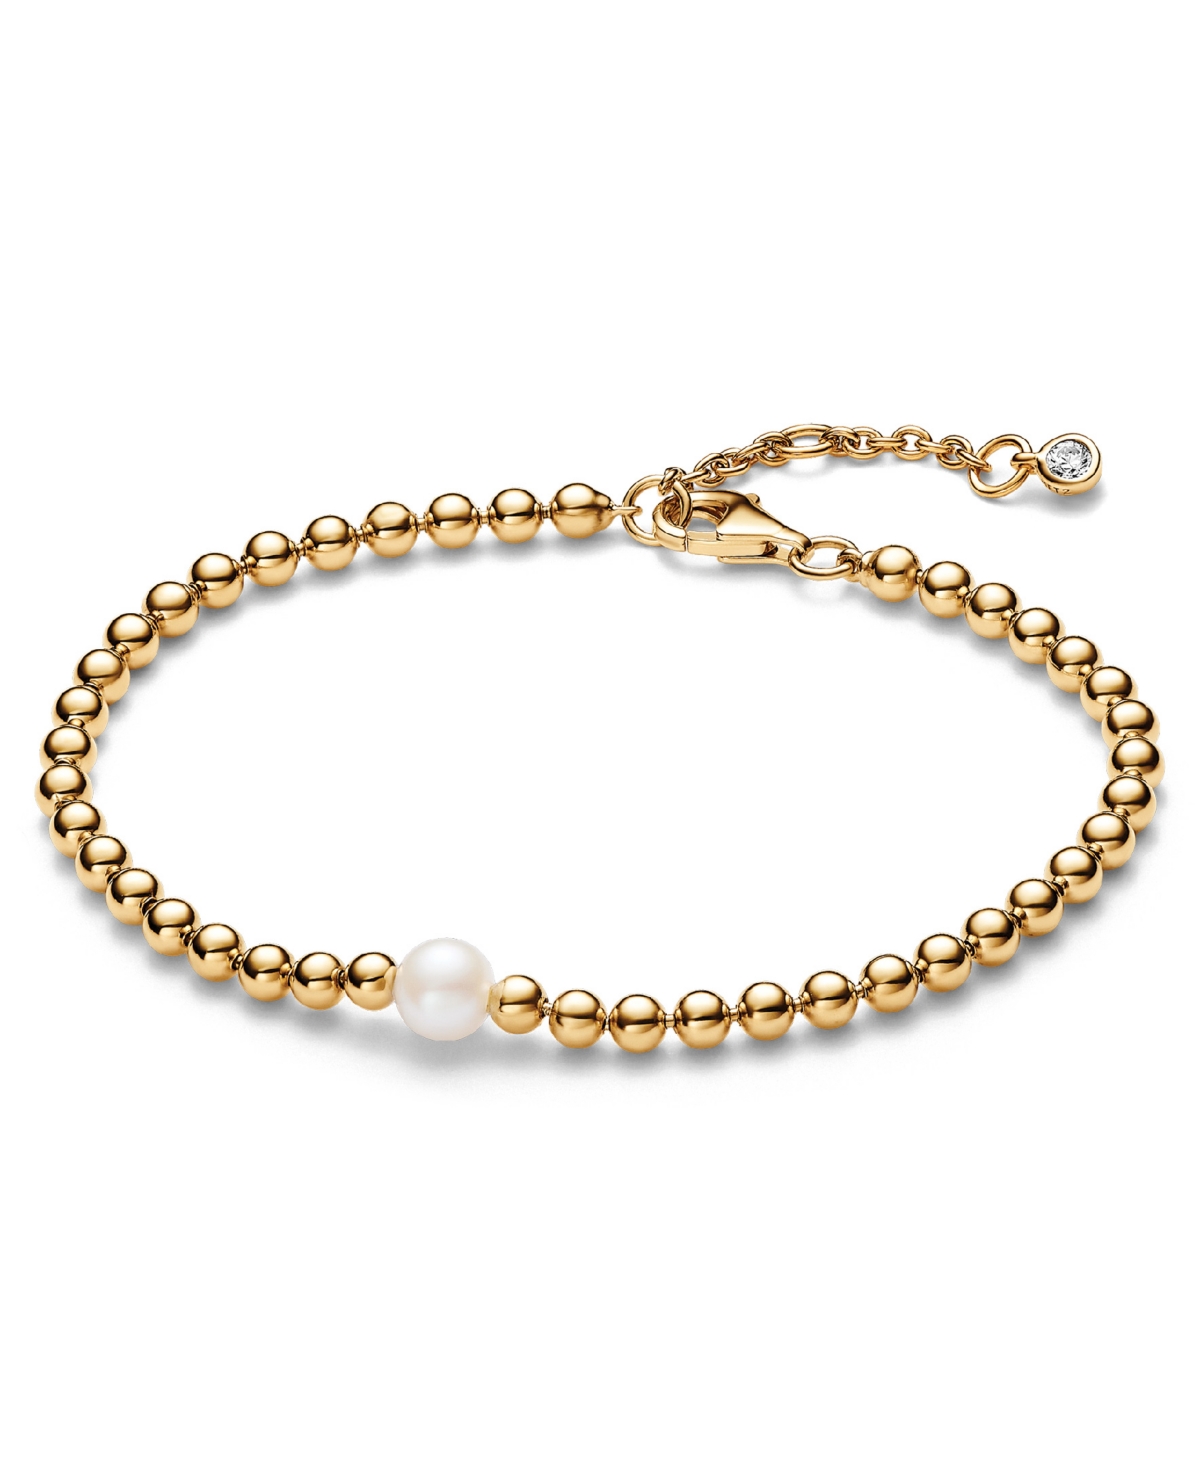 14K Gold-Plated Timeless Treated Freshwater Cultured Pearl Beads Bracelet - Gold